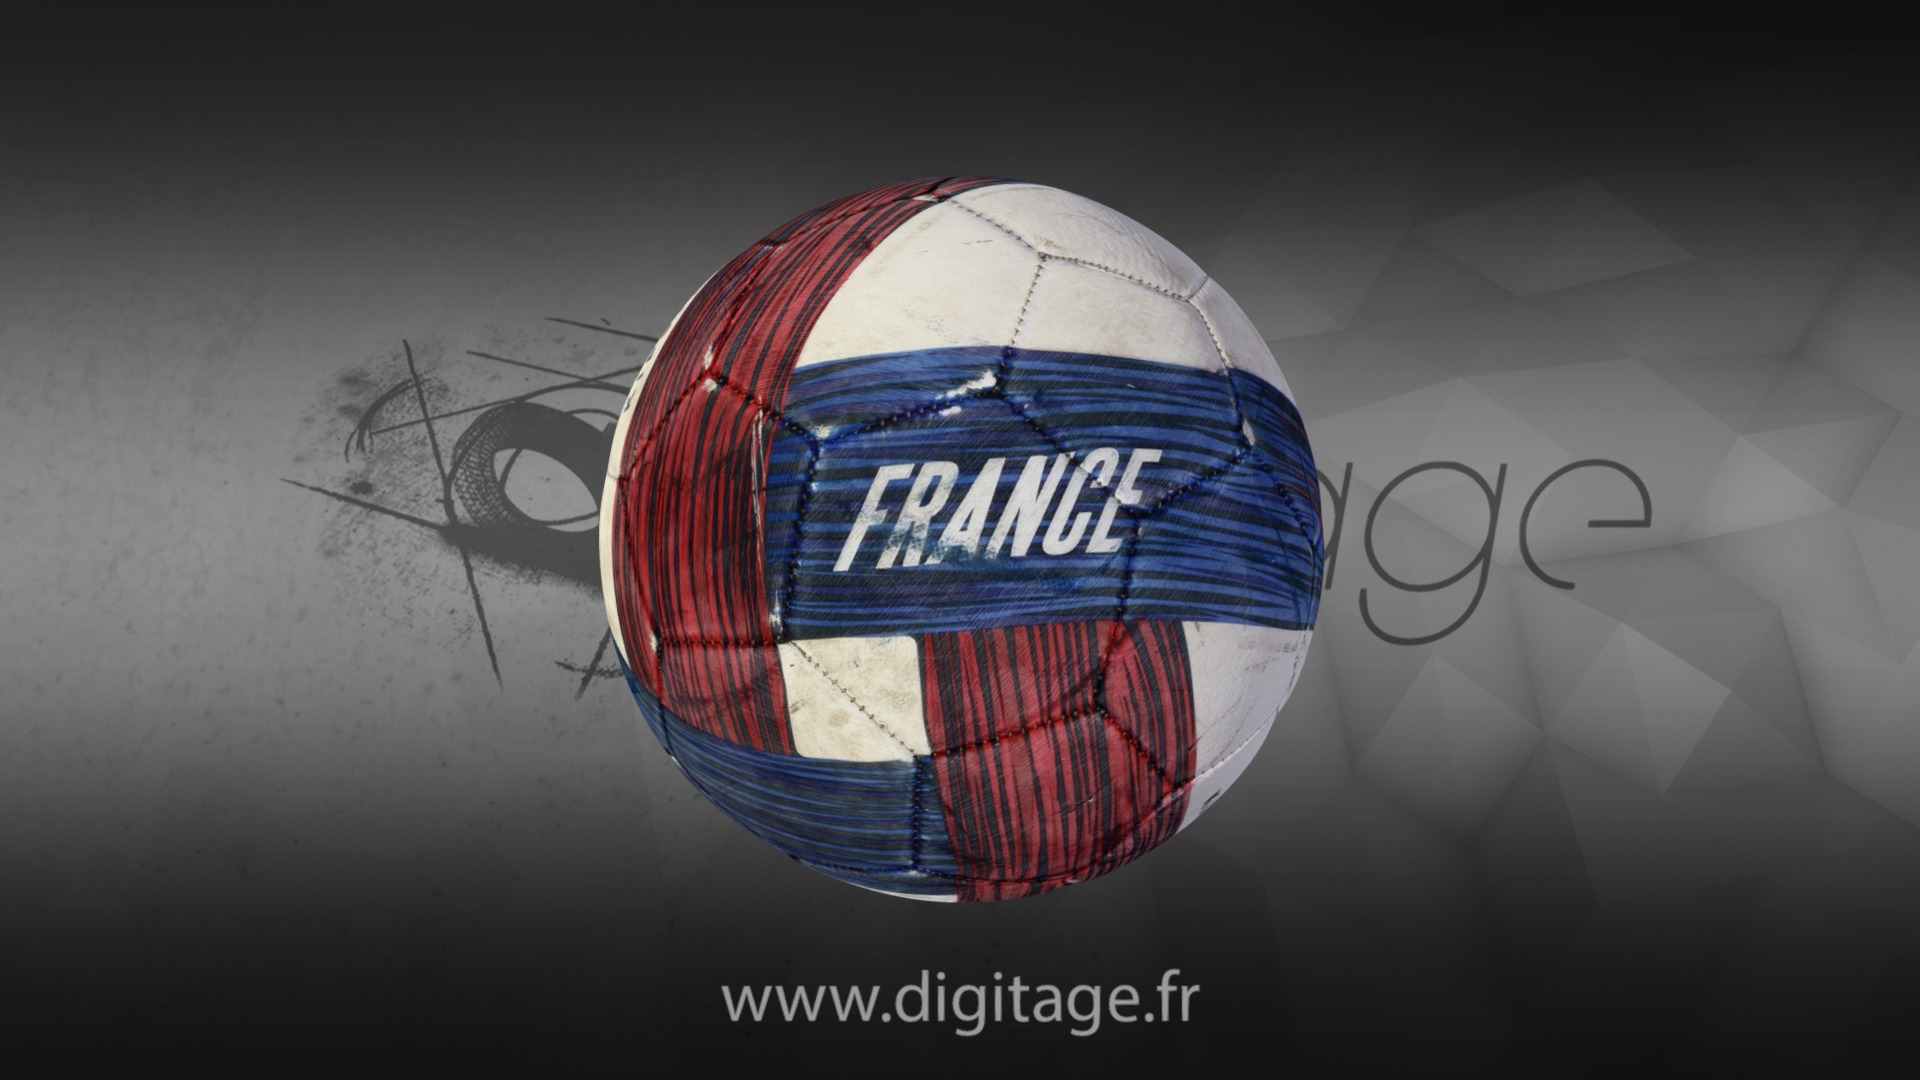 3D model Football - This is a 3D model of the Football. The 3D model is about a blue and red ball.